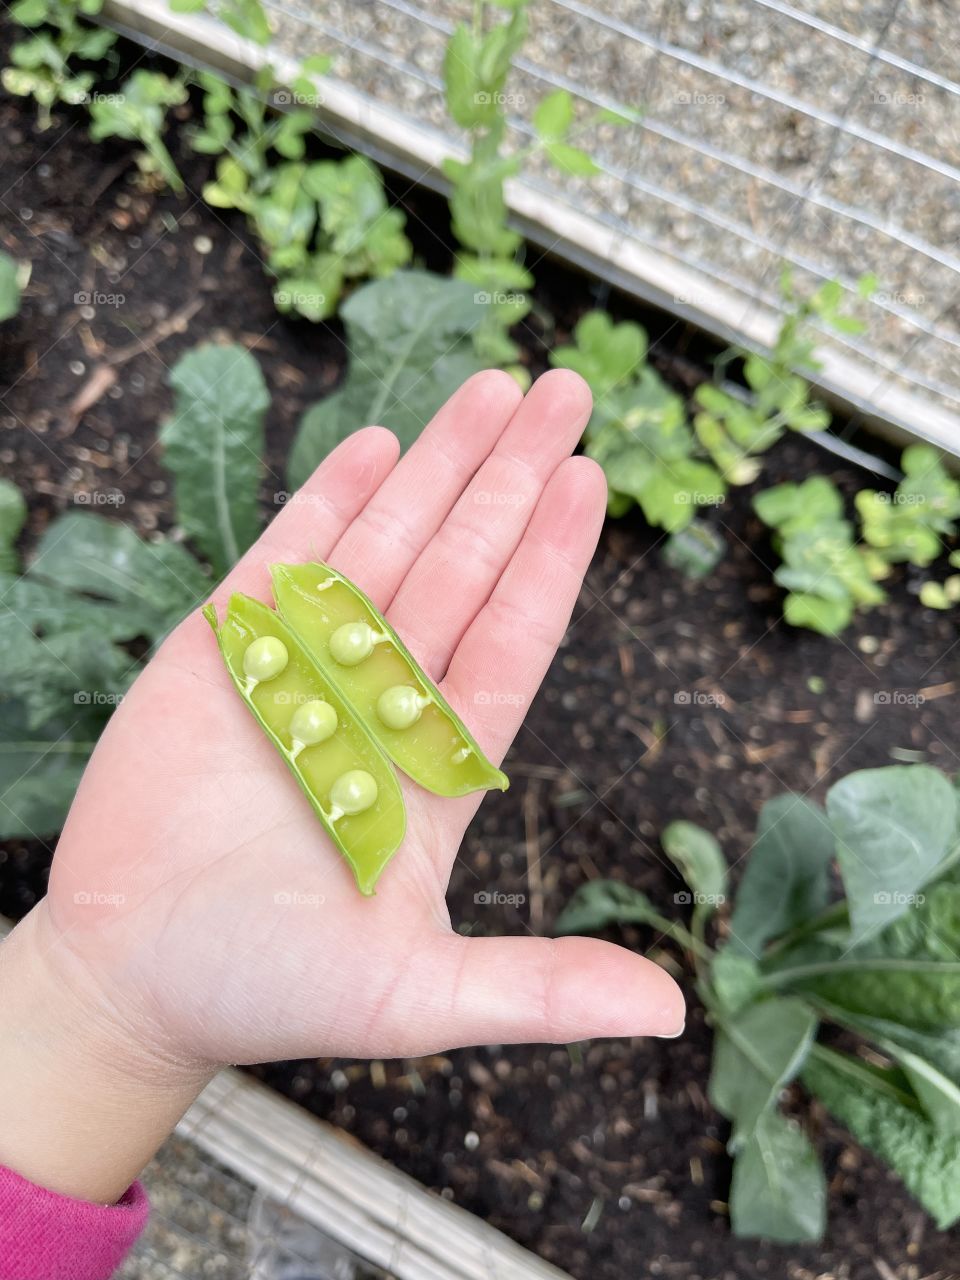 Child’s hand holding an open pea pod